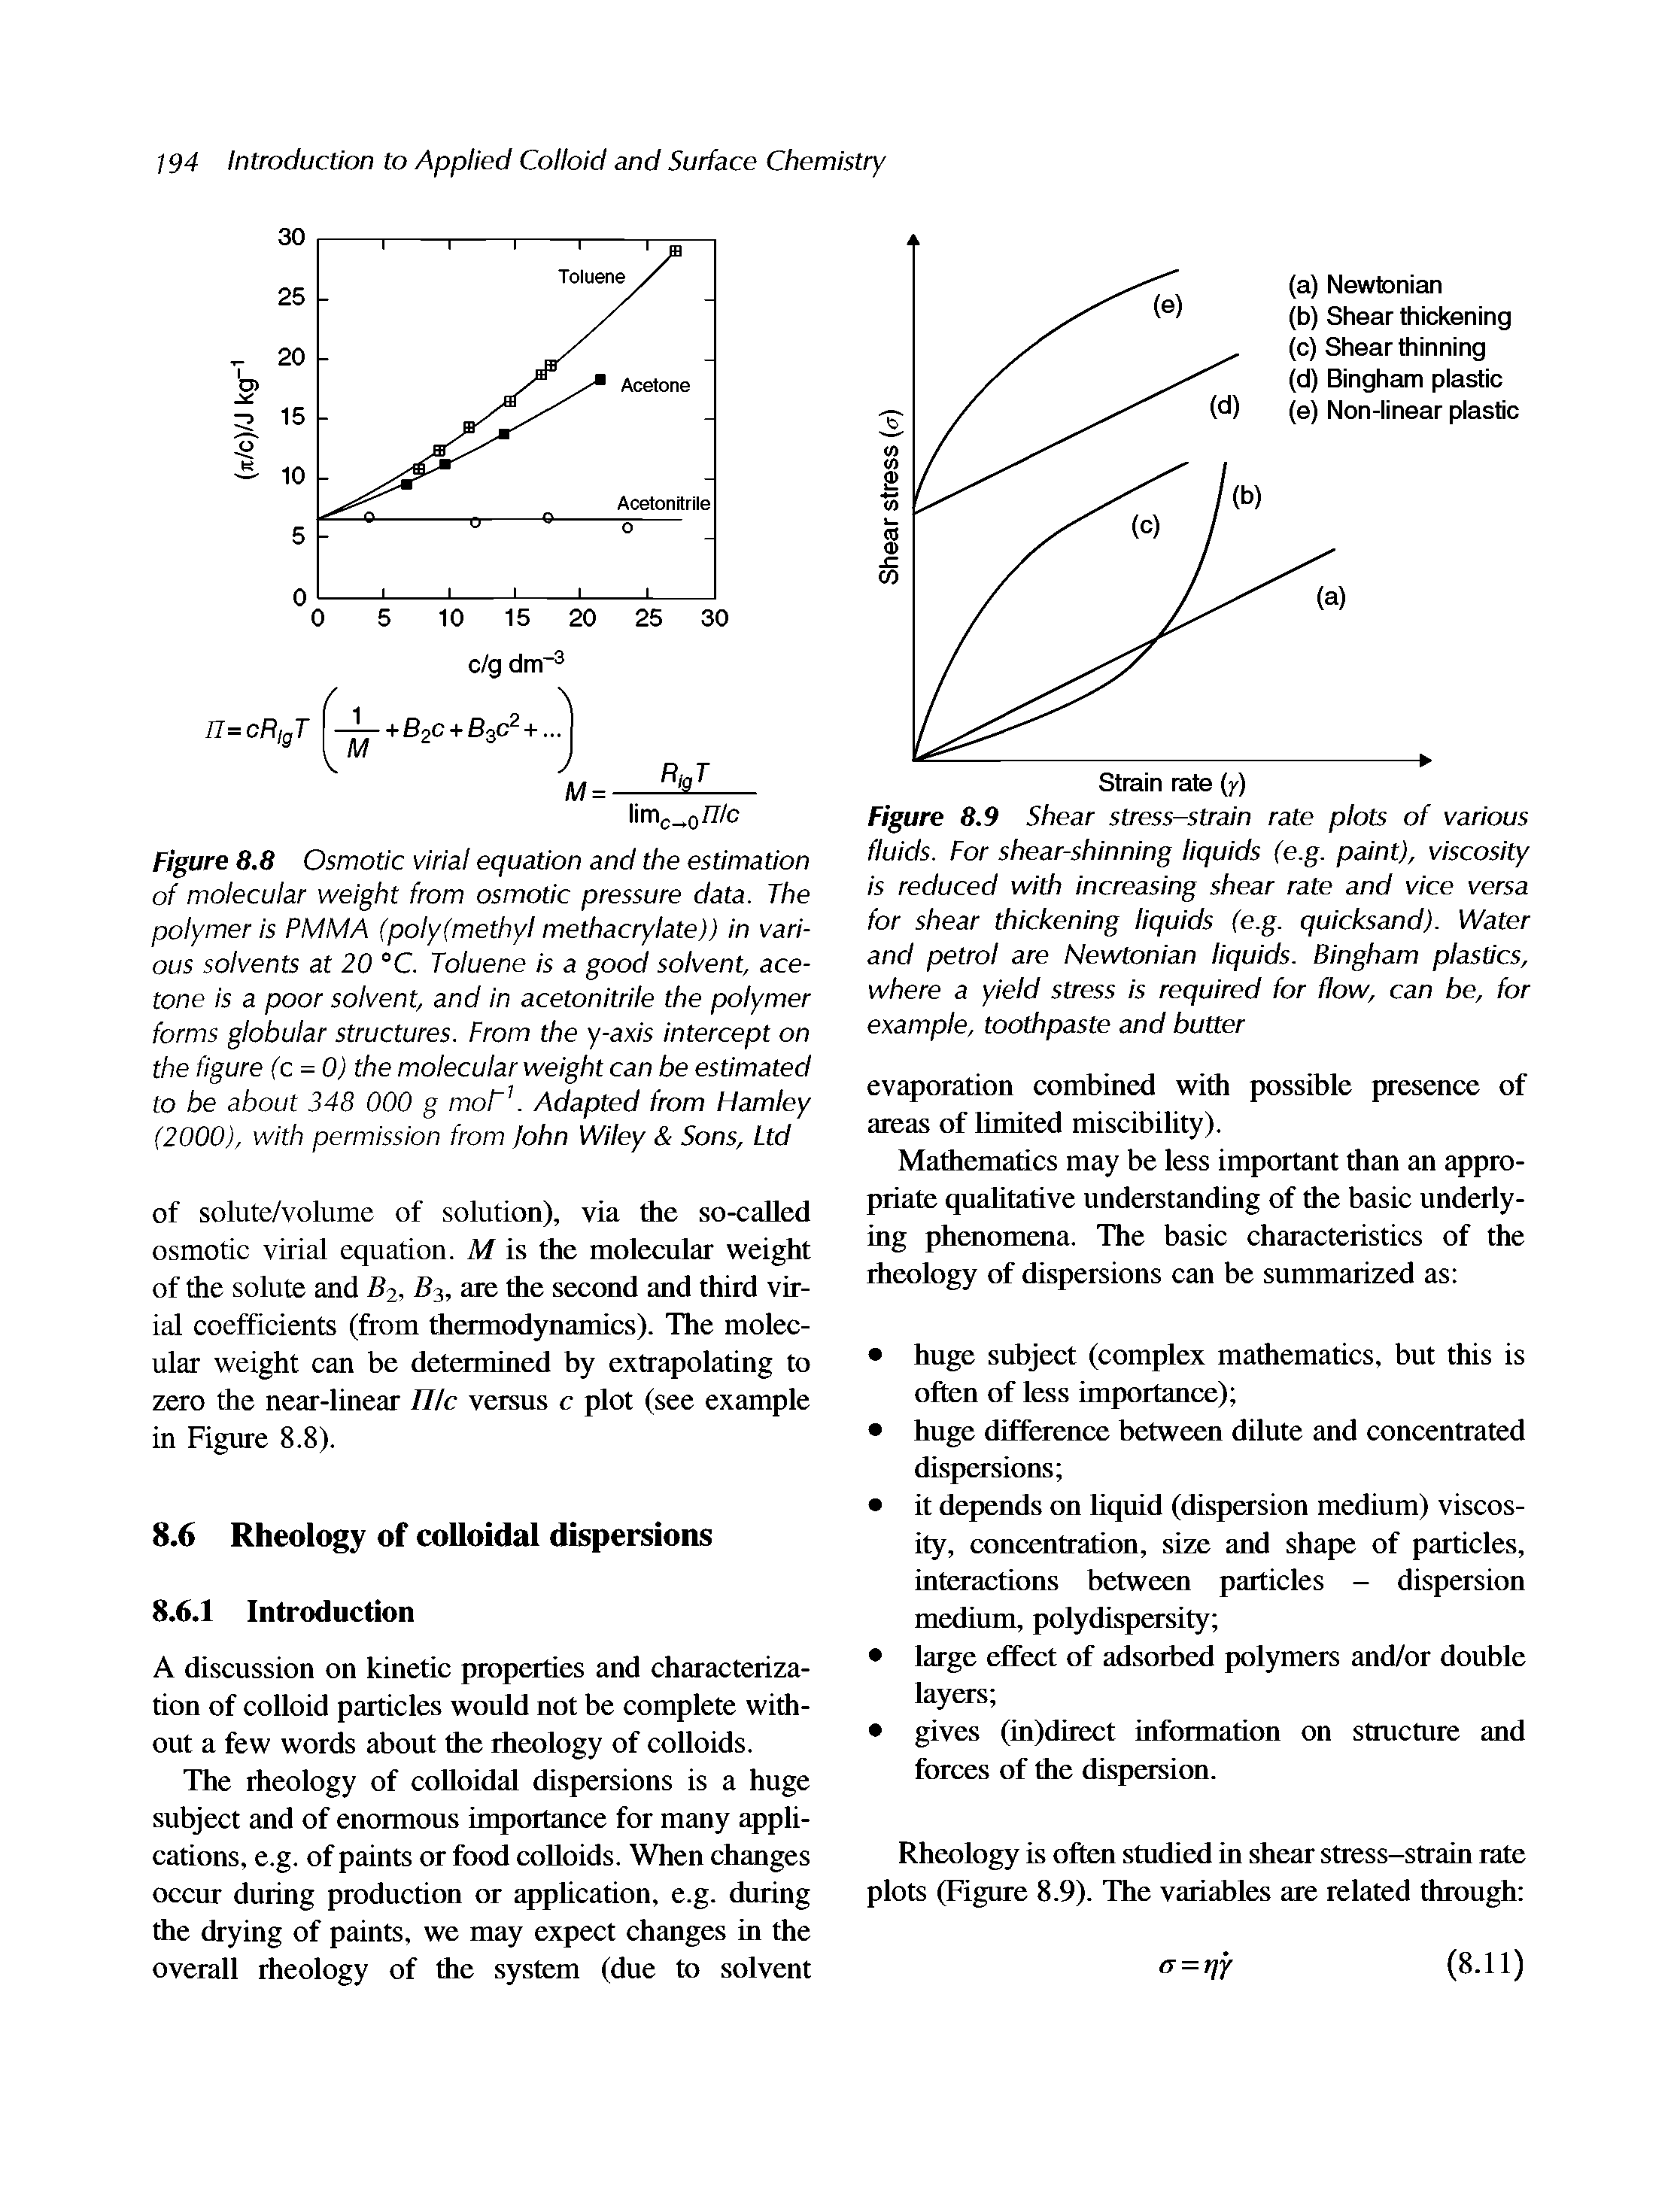 Figure 8.9 Shear stress-streun rate plots of various fluids. For shear-shinning liquids (e.g. paint), viscosity is reduced with increasing shear rate and vice versa for shear thickening liquids (e.g. quicksemd). Water and petrol are Newtonian liquids. Bingham plastics, where a yield stress is required for flow, can be, for example, toothpaste and butter...